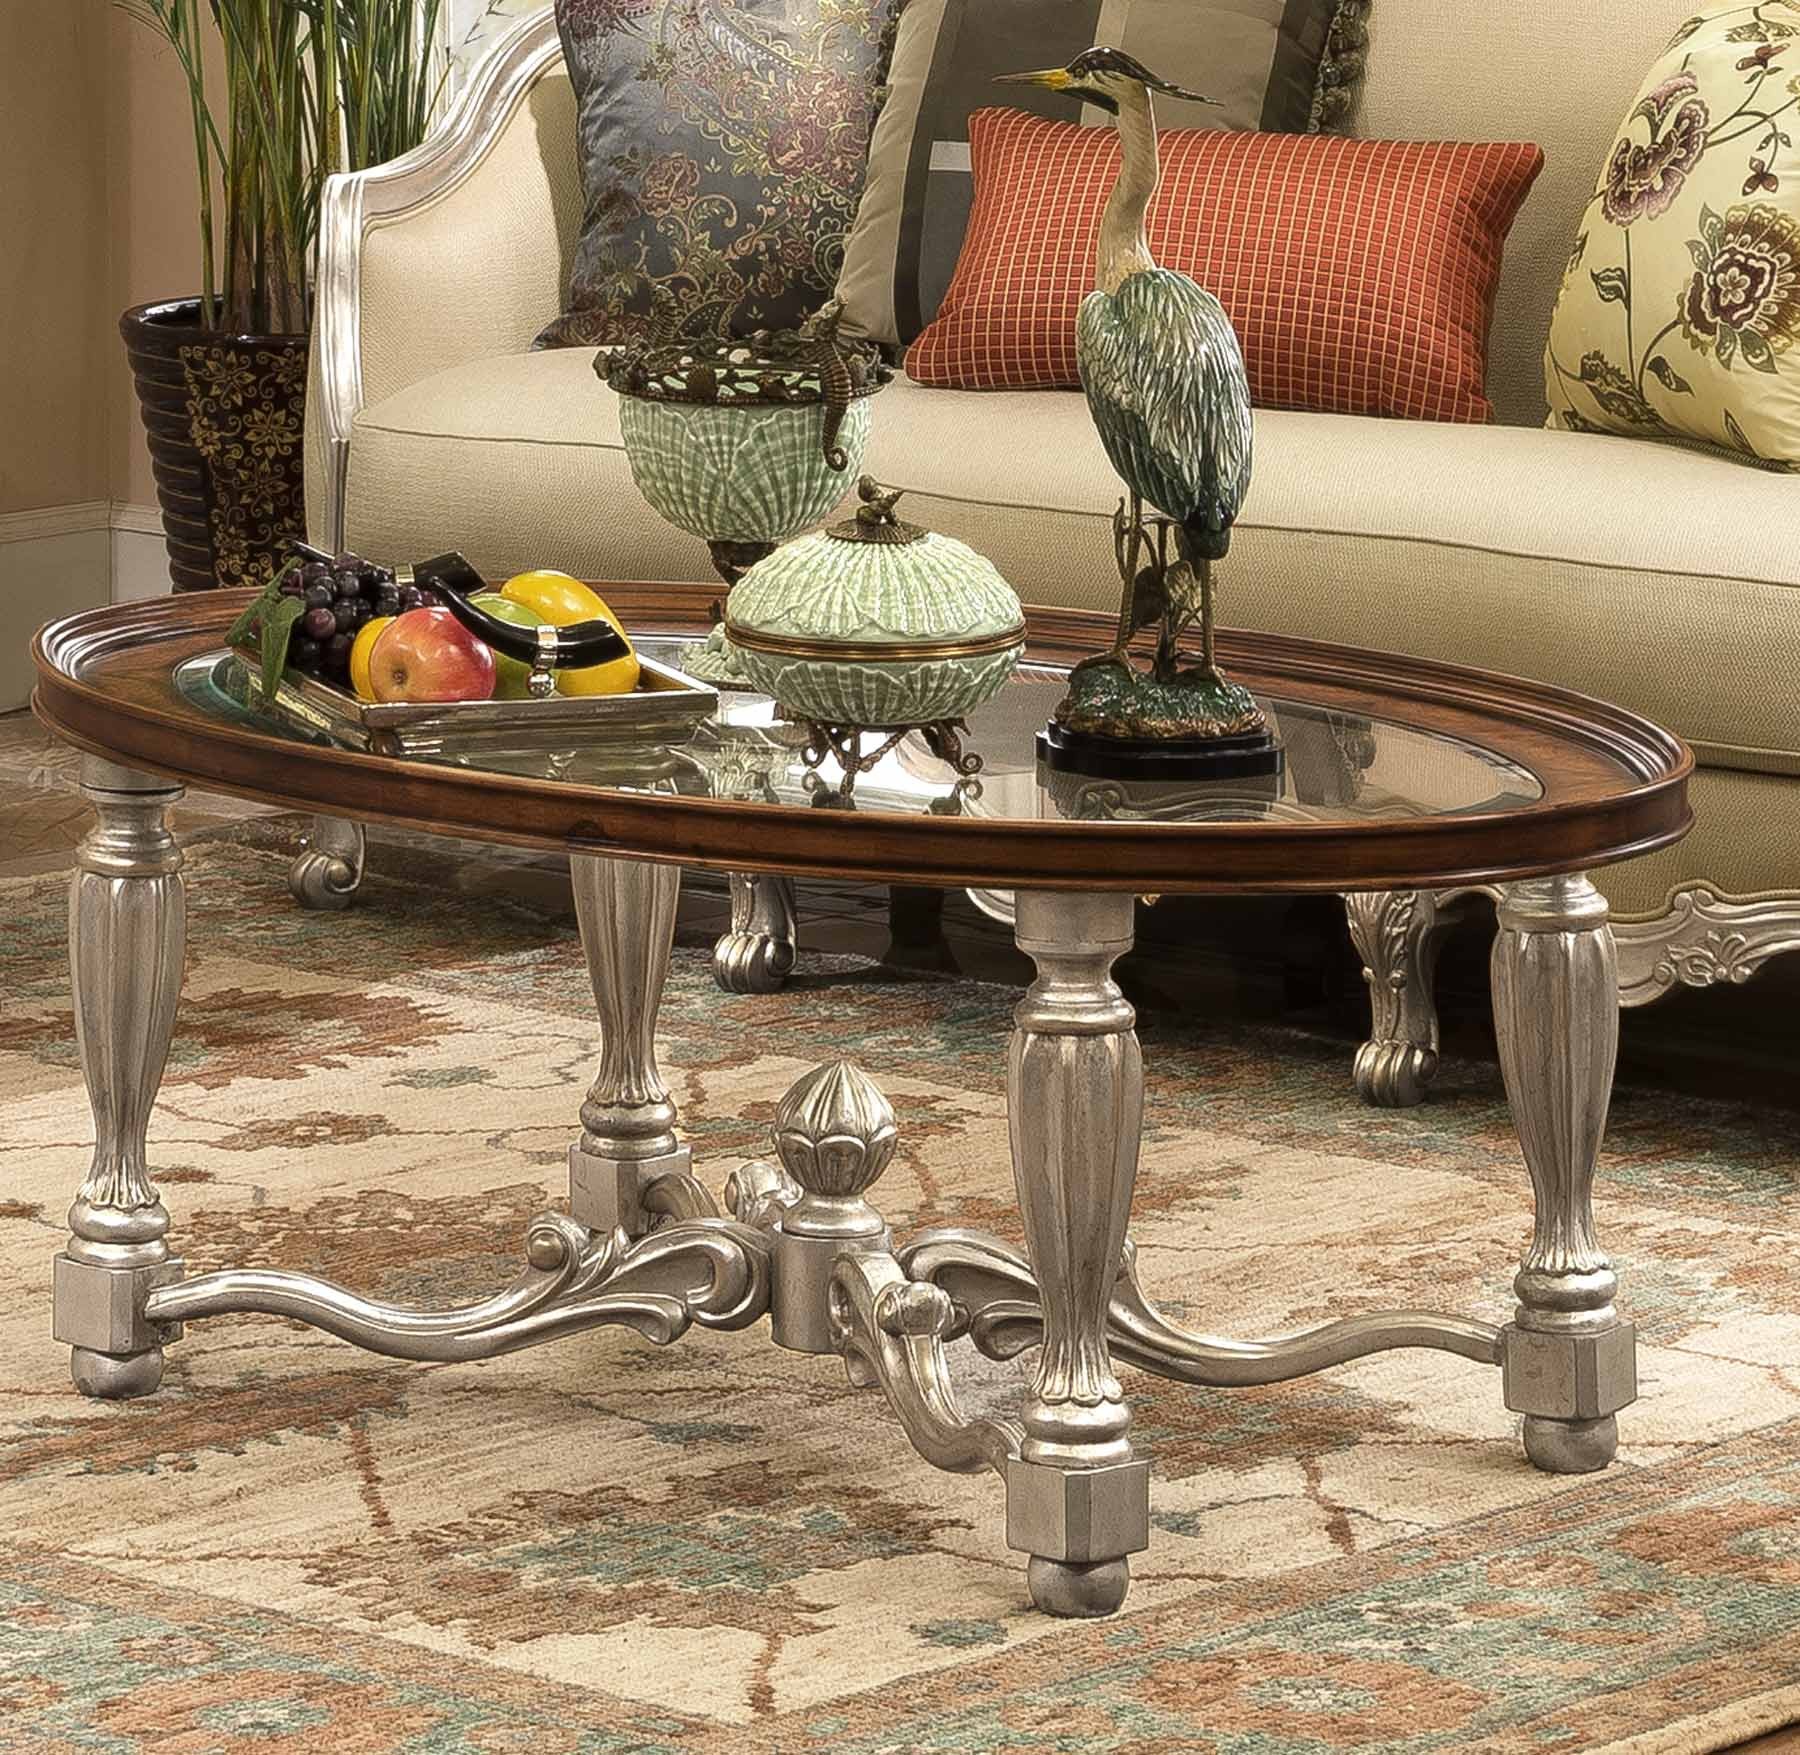 Leighton Coffee Table with Glass Top shown in Antique Silver Leaf finish